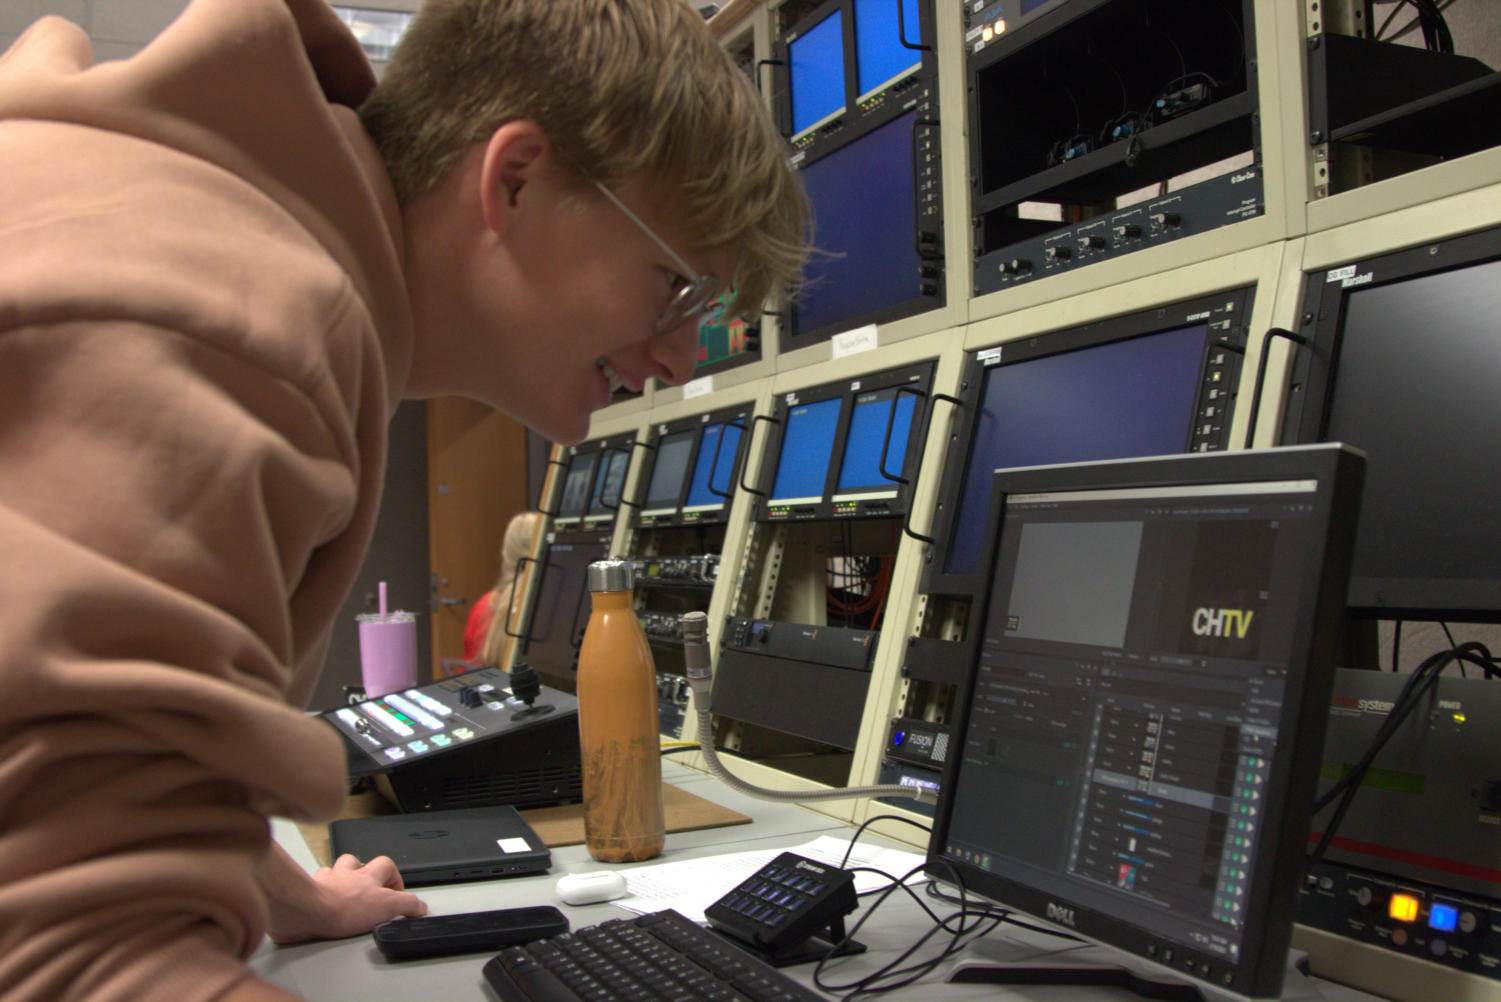 Scott making graphics for a CHTV newscast